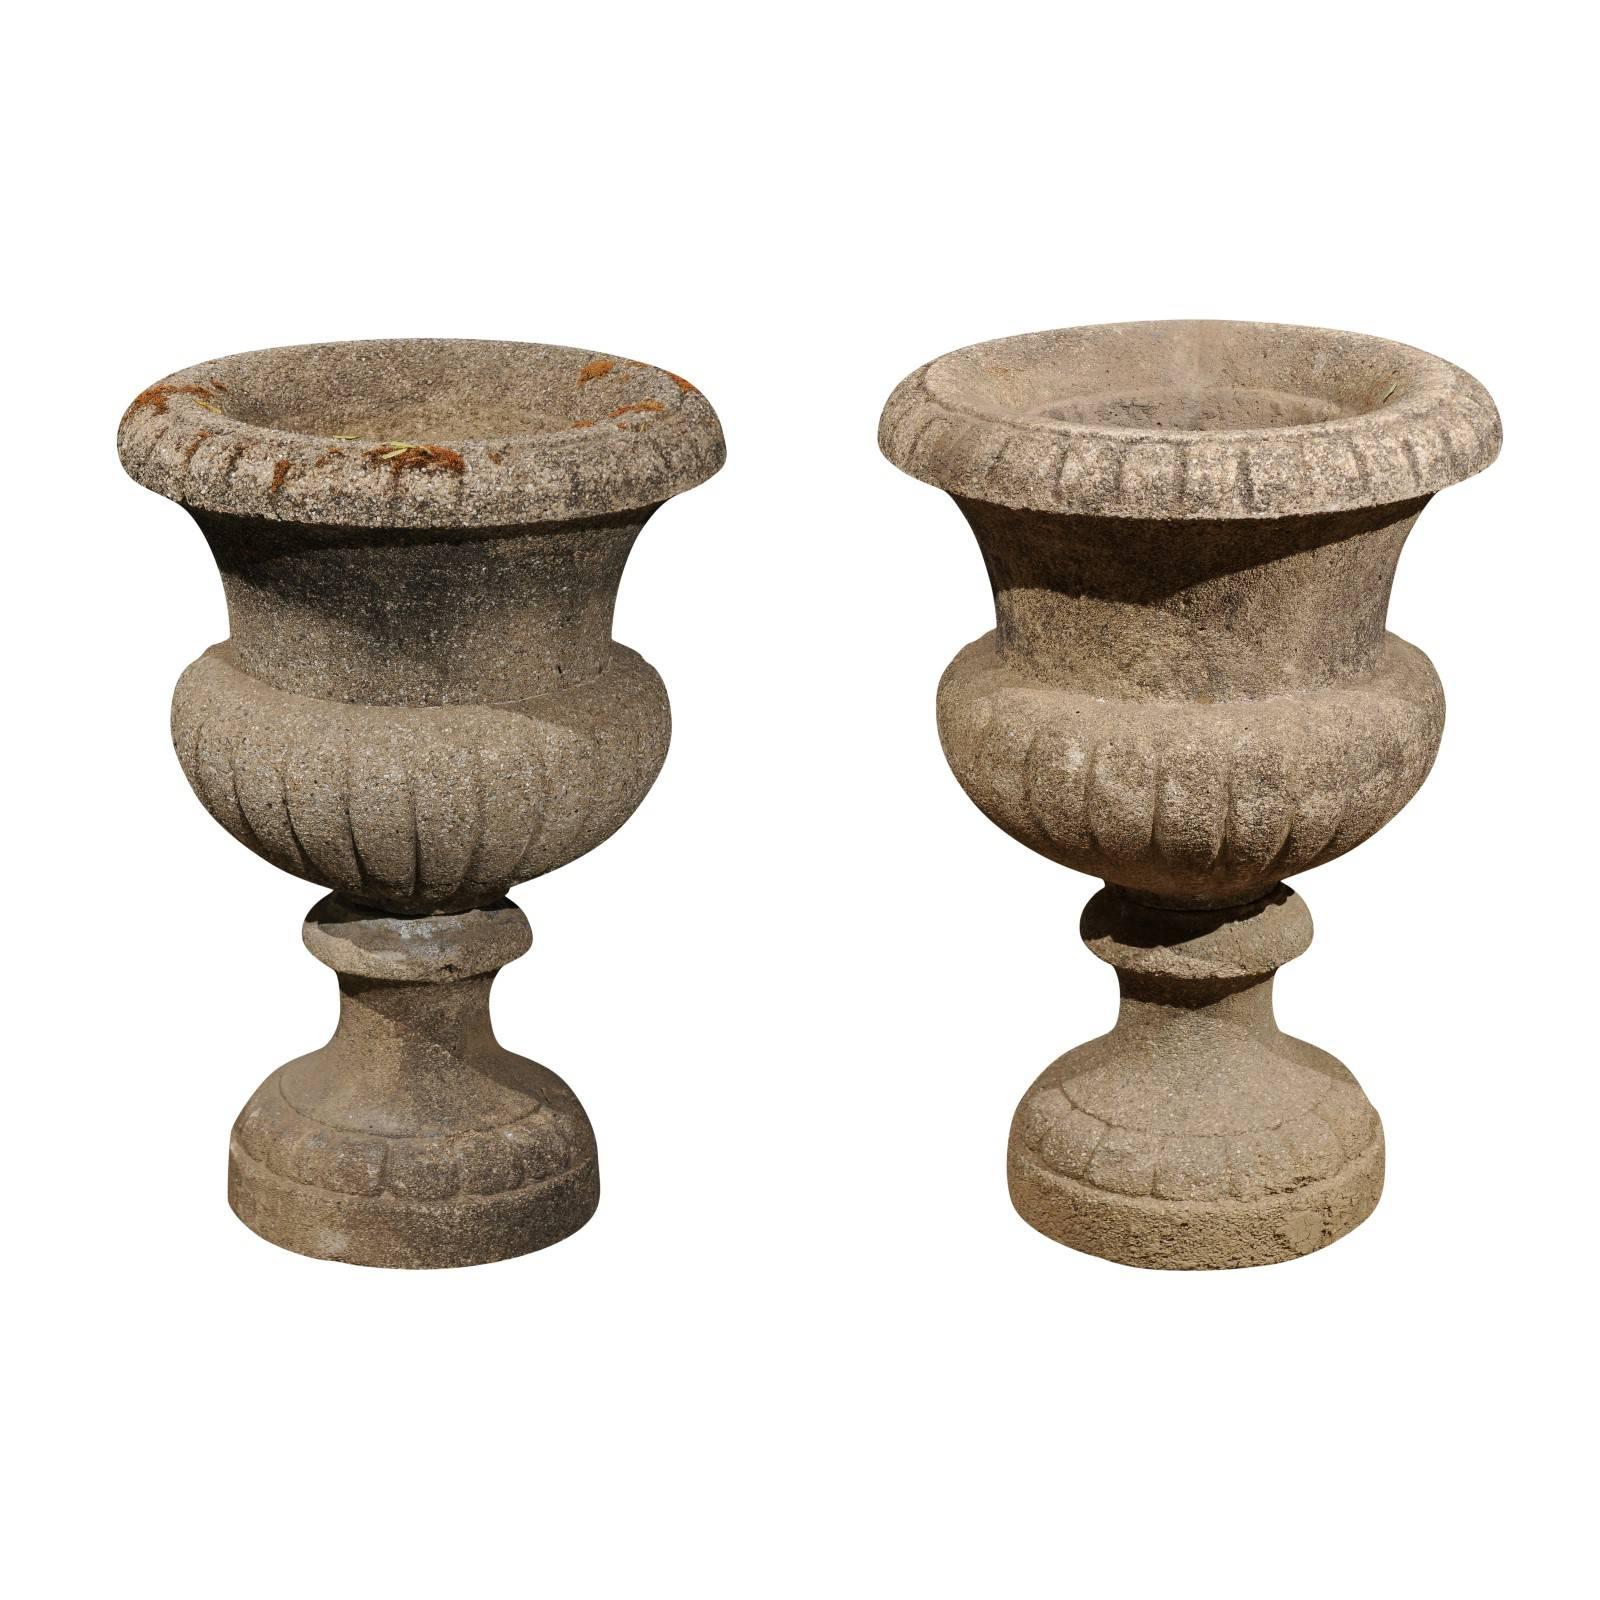 Pair of French Vases Médicis Stone Planters with Gadroon Motifs, circa 1890